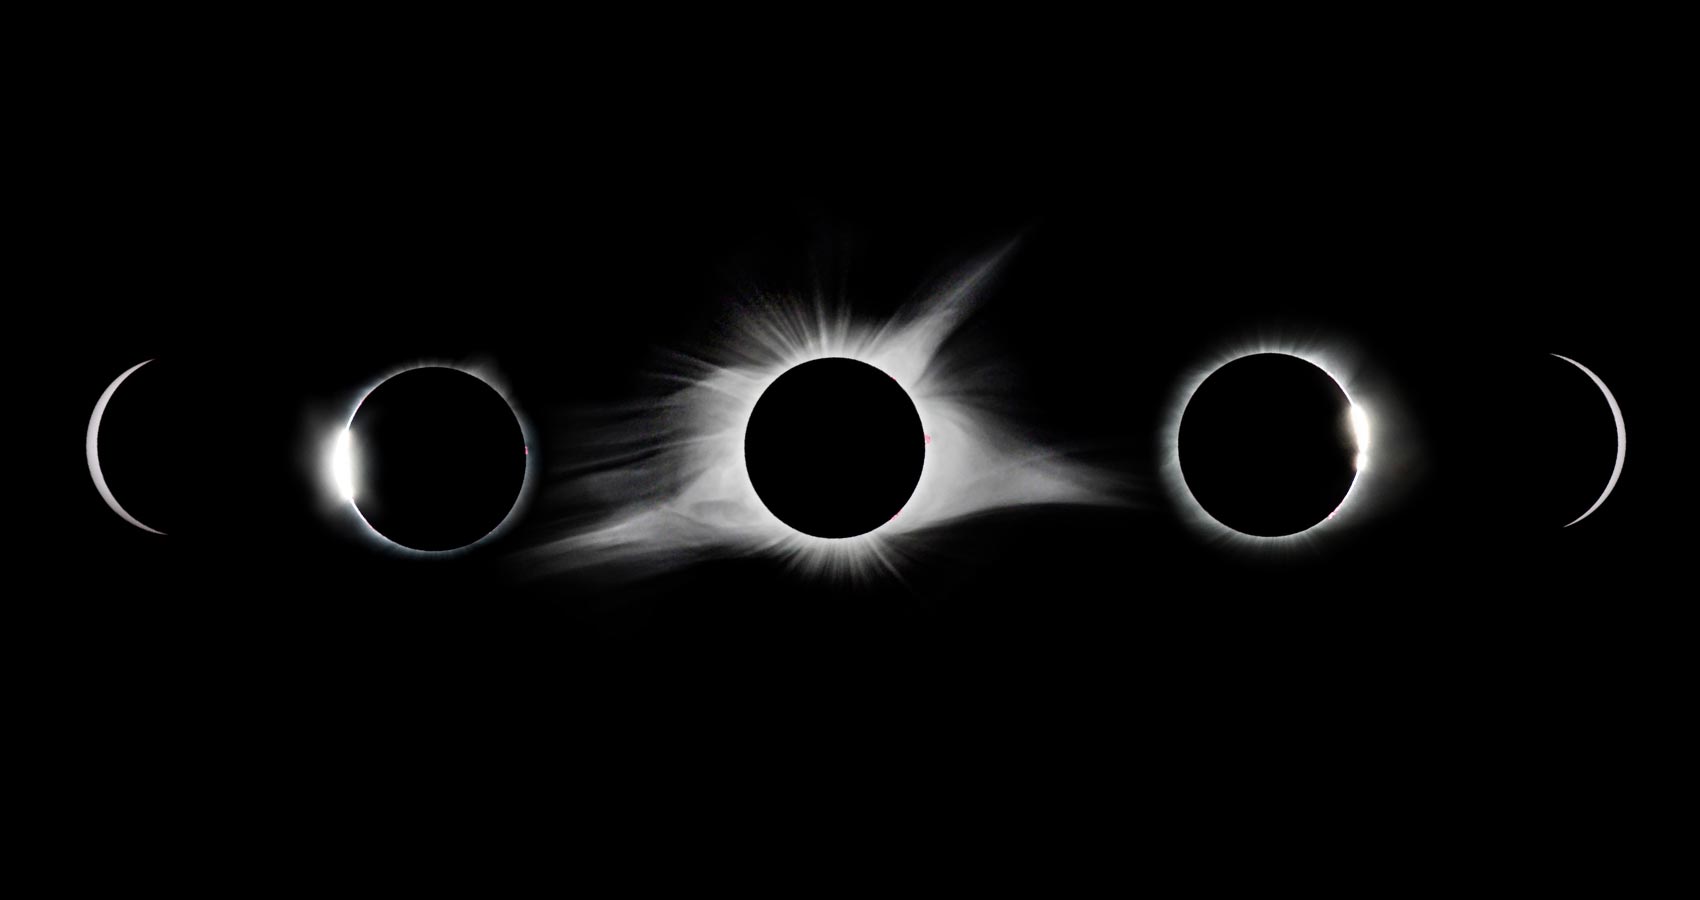 Eclipse, poetry written by Nidhi Agrawal at Spillwords.com